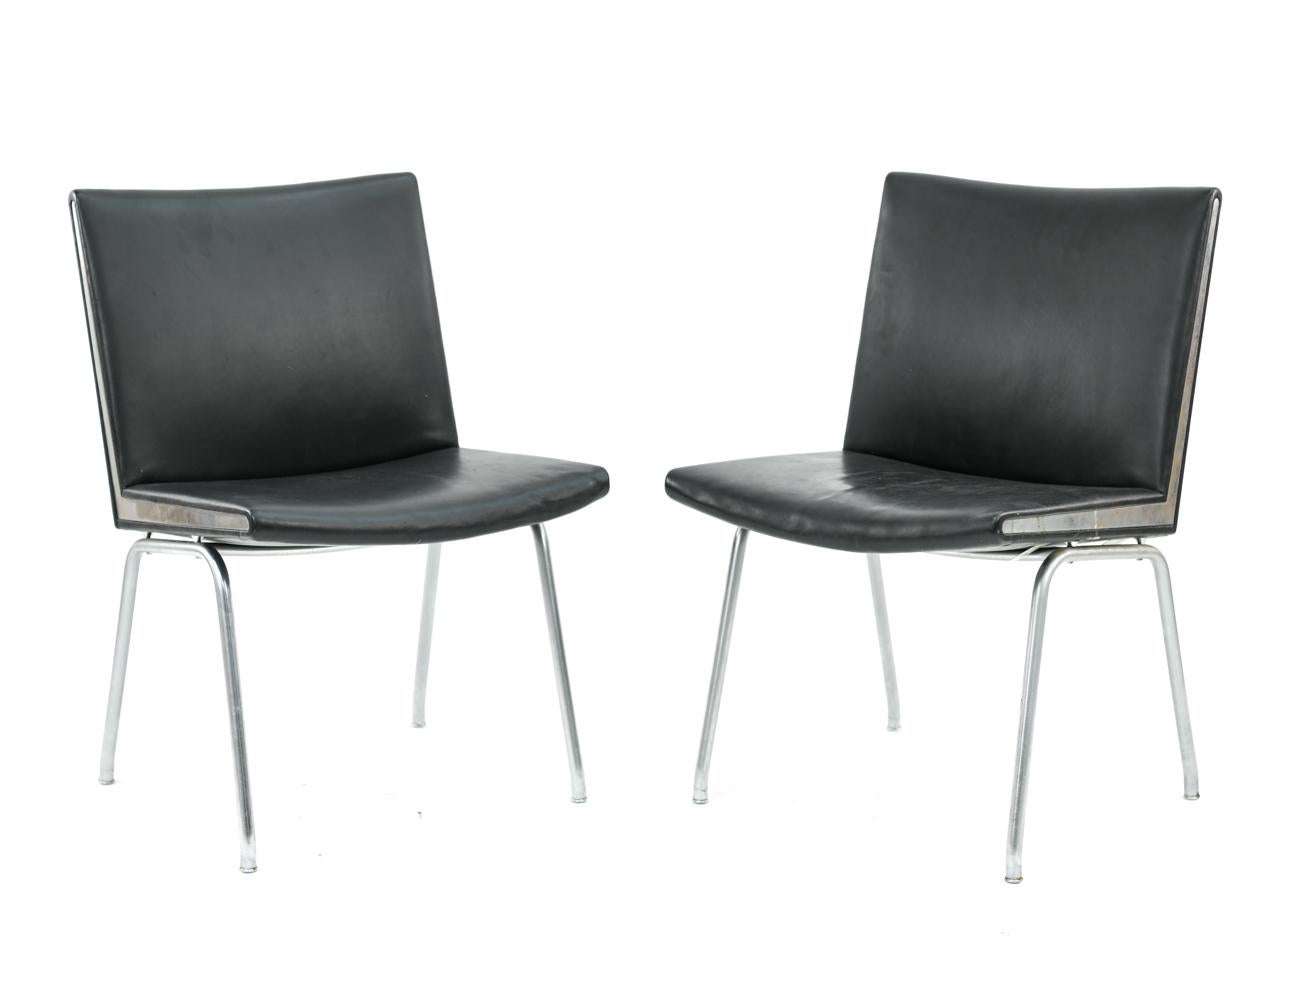 Steel Four Airport Chairs, Model AP-38, by Hans J. Wegner and A.P. Stolen, 1960s